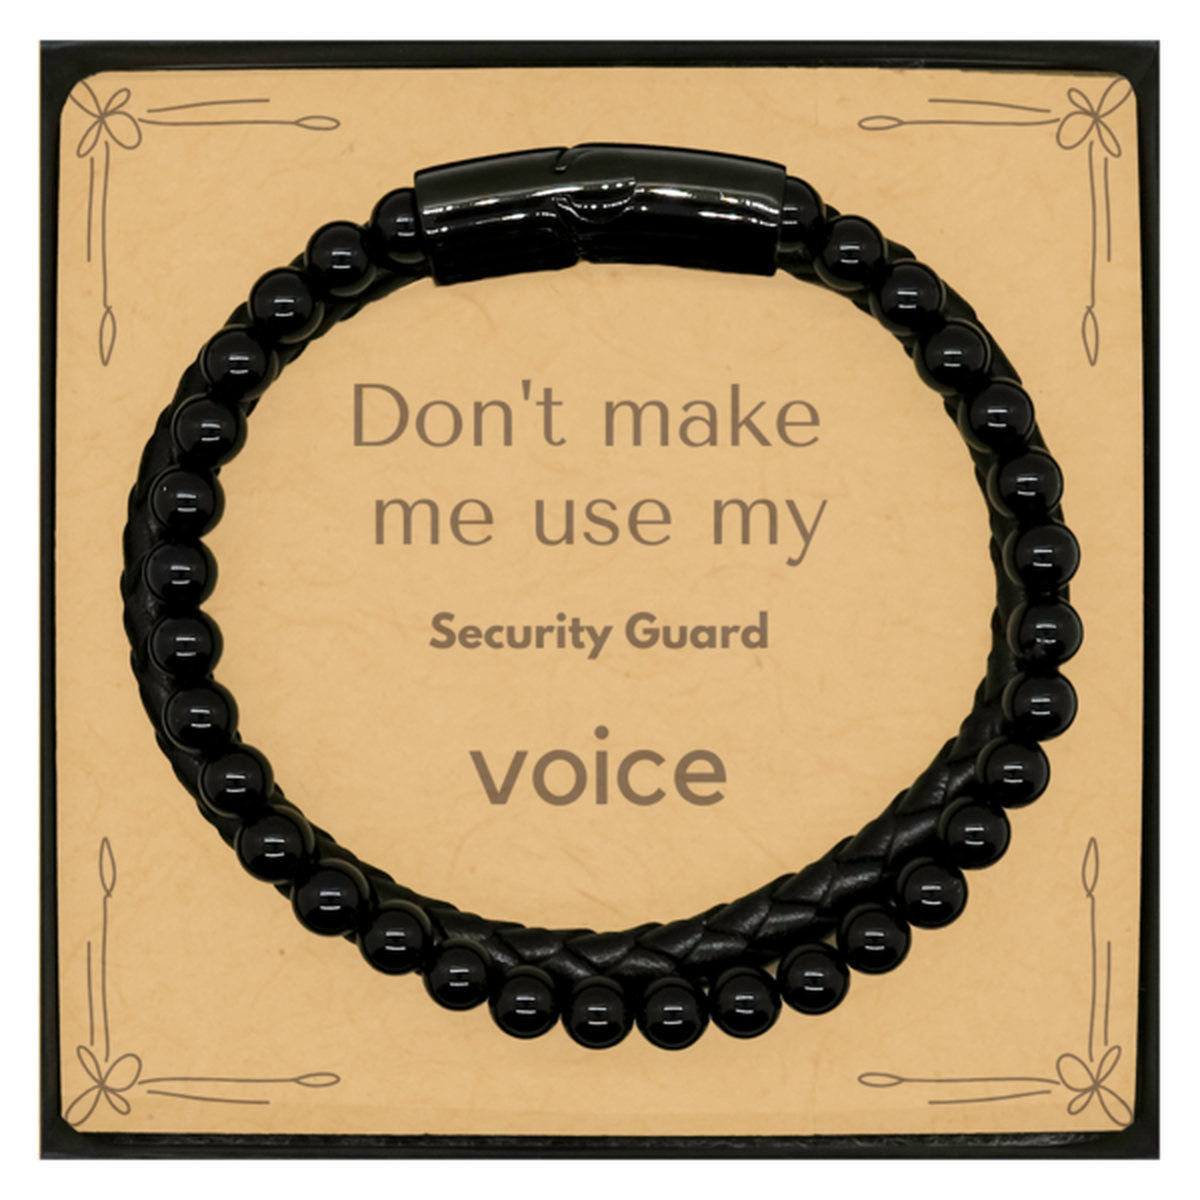 Don't make me use my Security Guard voice, Sarcasm Security Guard Card Gifts, Christmas Security Guard Stone Leather Bracelets Birthday Unique Gifts For Security Guard Coworkers, Men, Women, Colleague, Friends